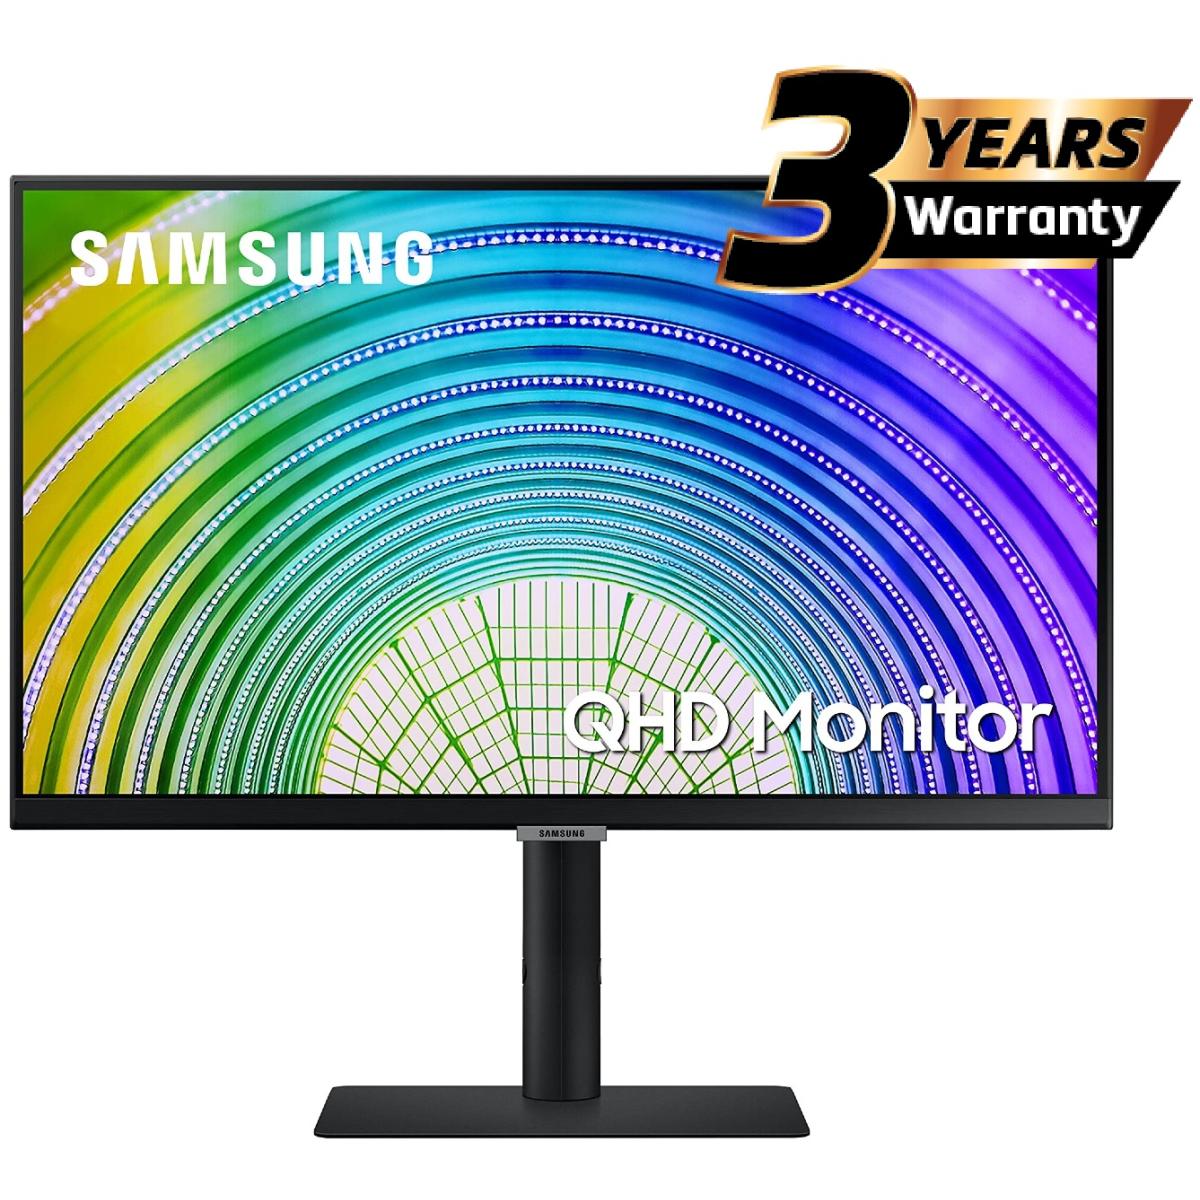 Samsung 27” ViewFinity S6 QHD Flat Monitor with 75Hz Refresh Rate